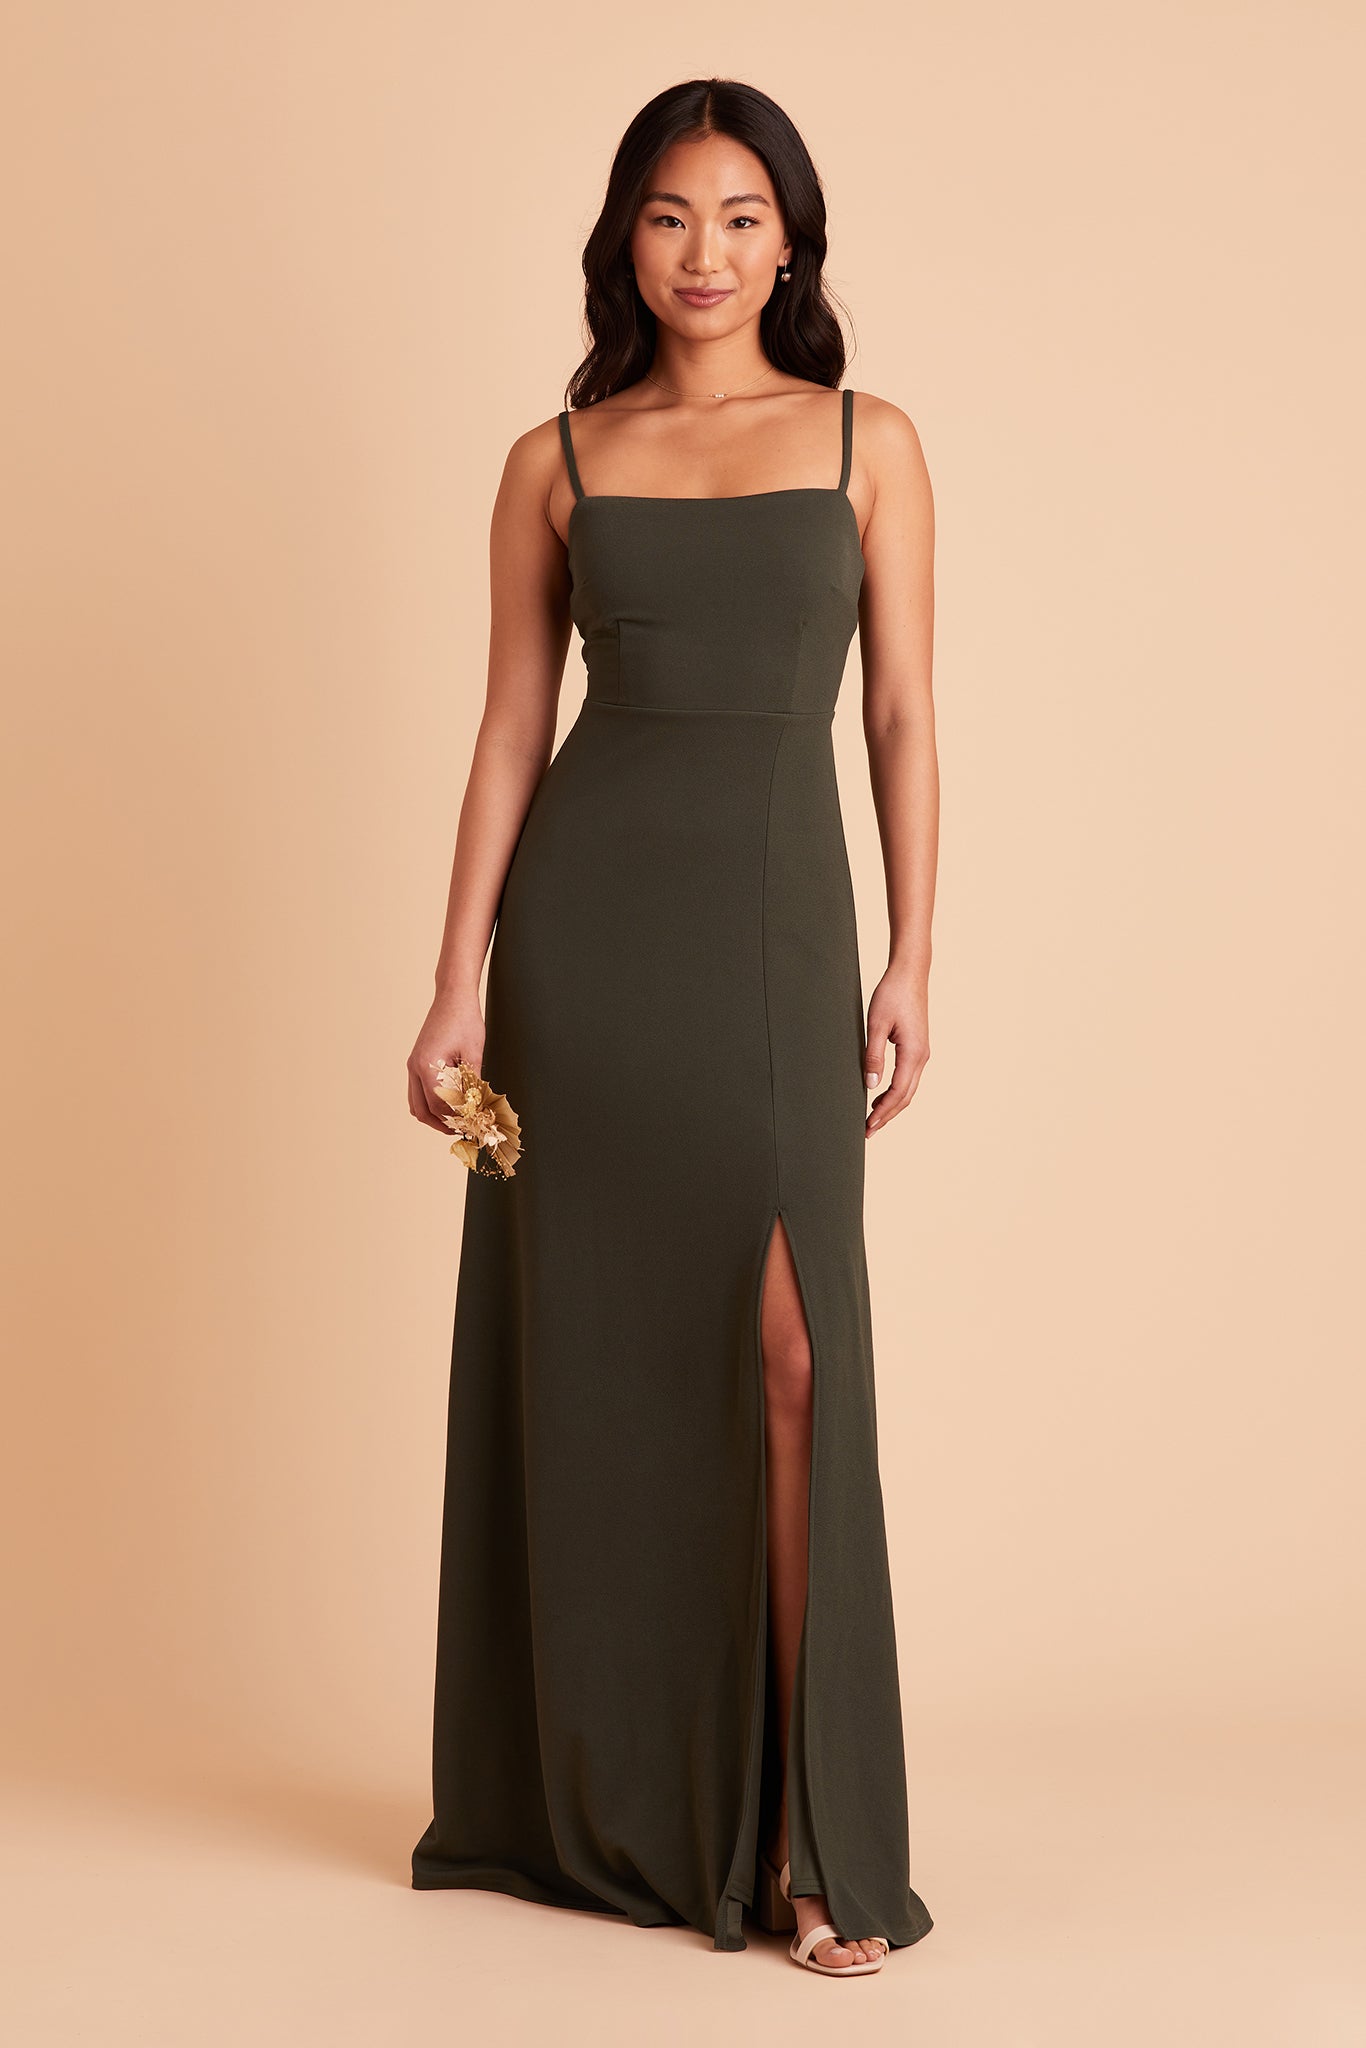 Benny bridesmaid dress in olive crepe by Birdy Grey, front view